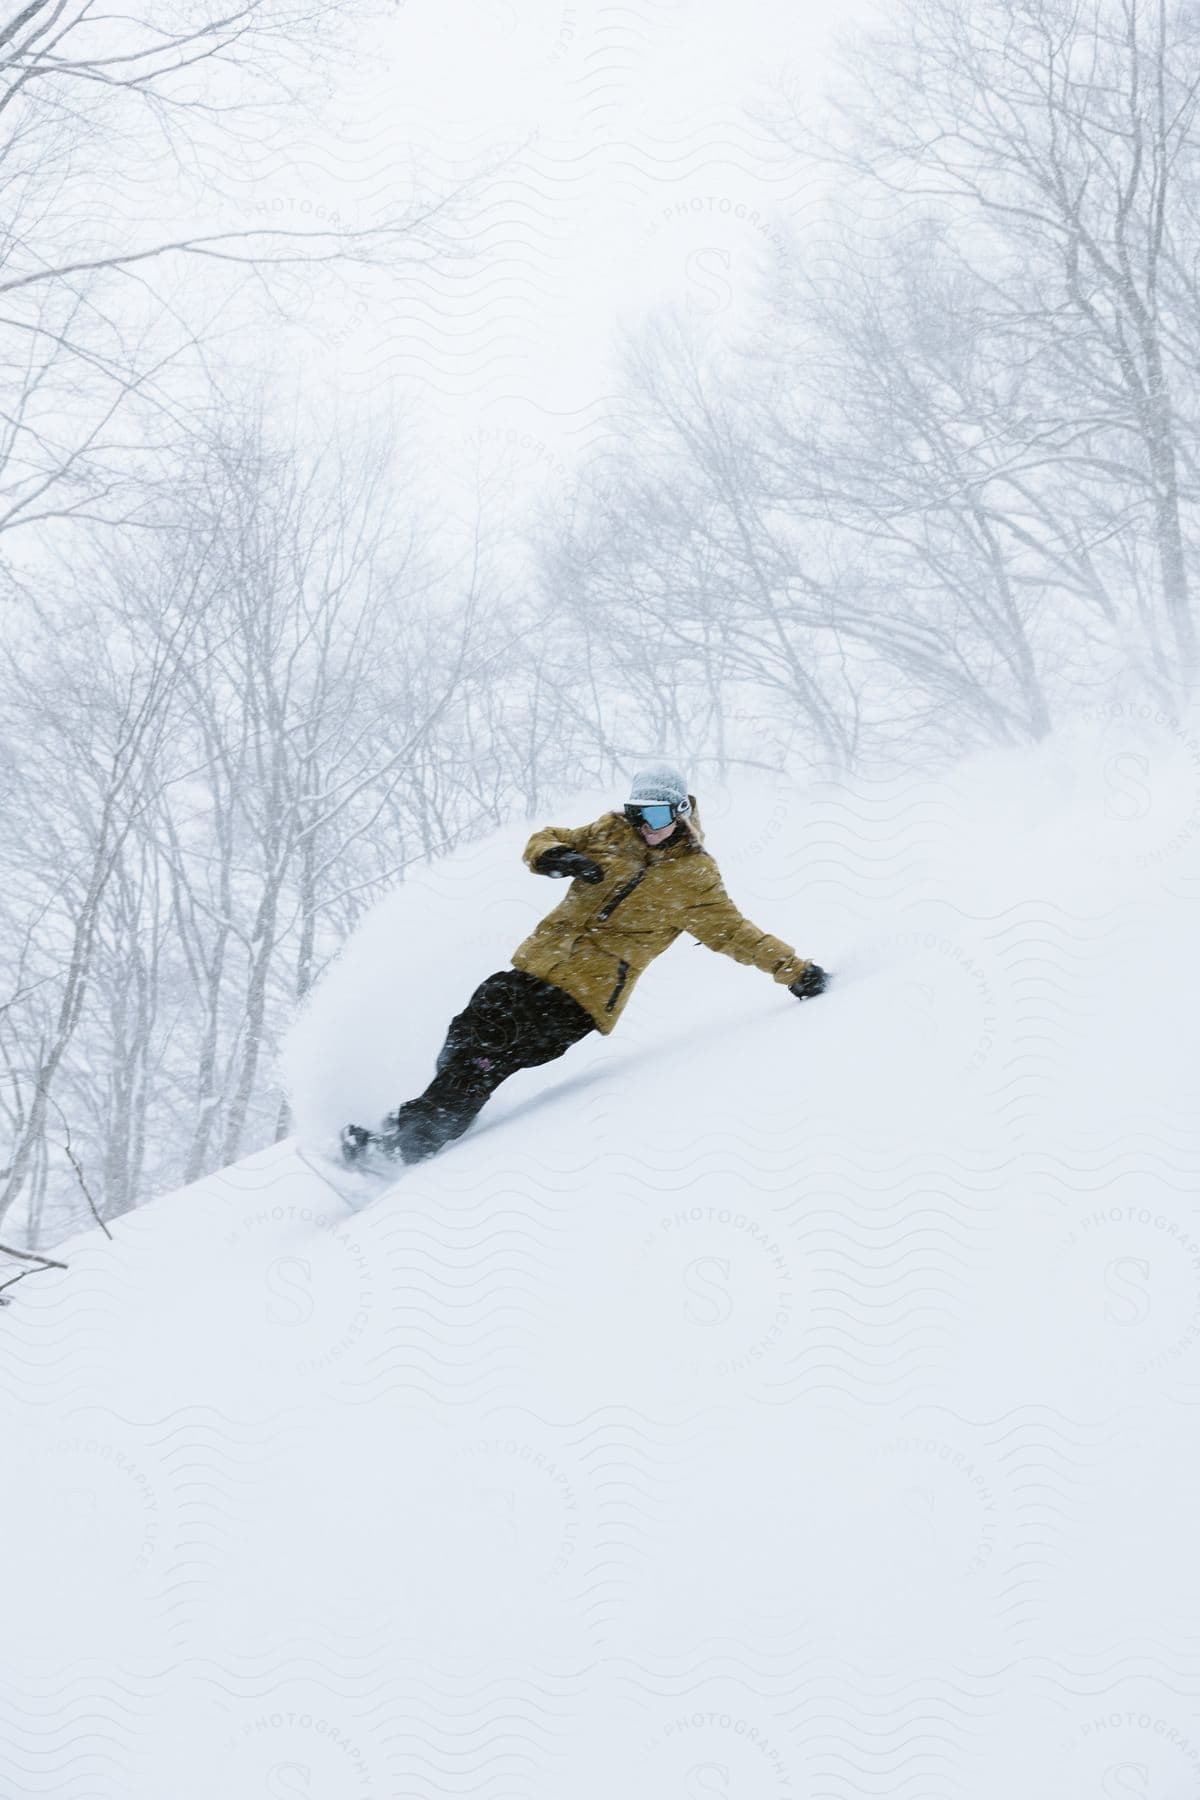 A person snowboarding down a steep slope in the snow